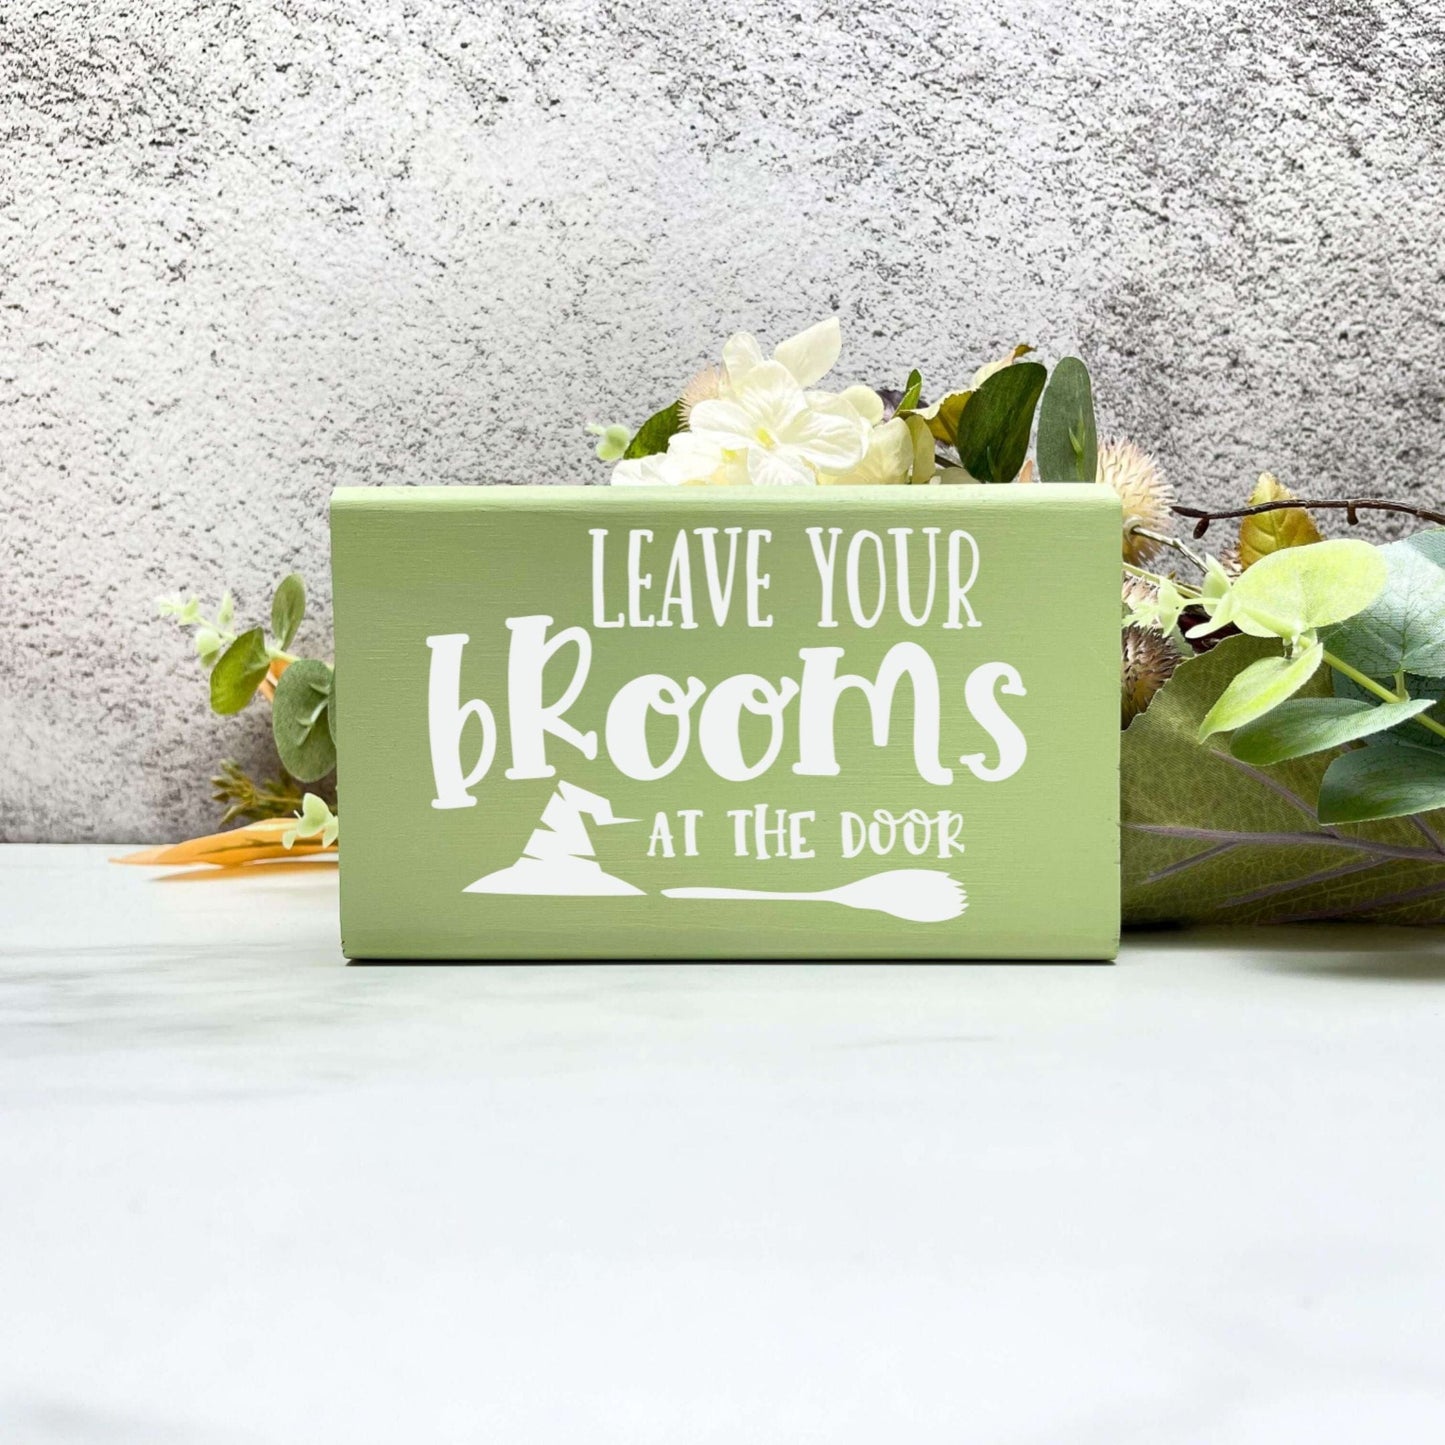 Leave your brooms Sign, Halloween Wood Sign, Halloween Home Decor, Spooky Decor